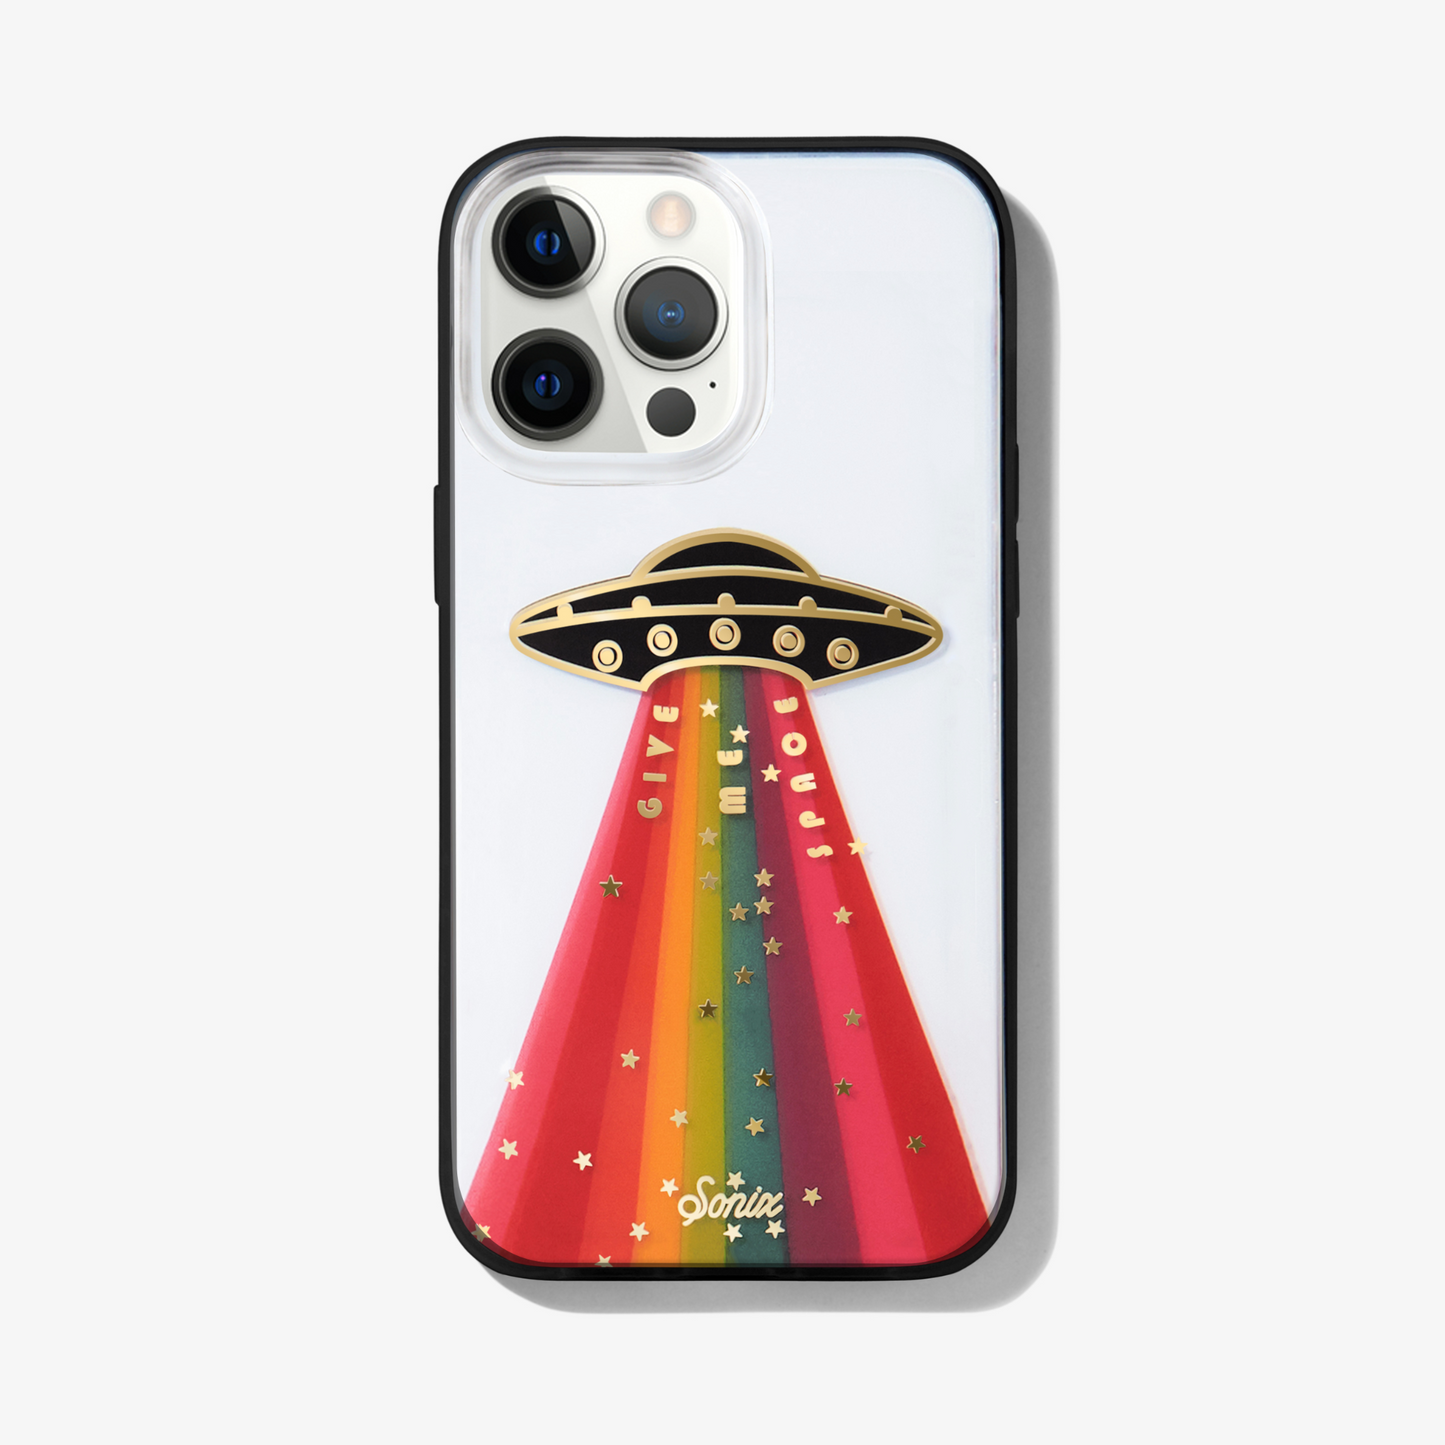 a rainbow ufo design and the words "give me space" with gold foiling and a black bumper shown on an iphone 13 prox max